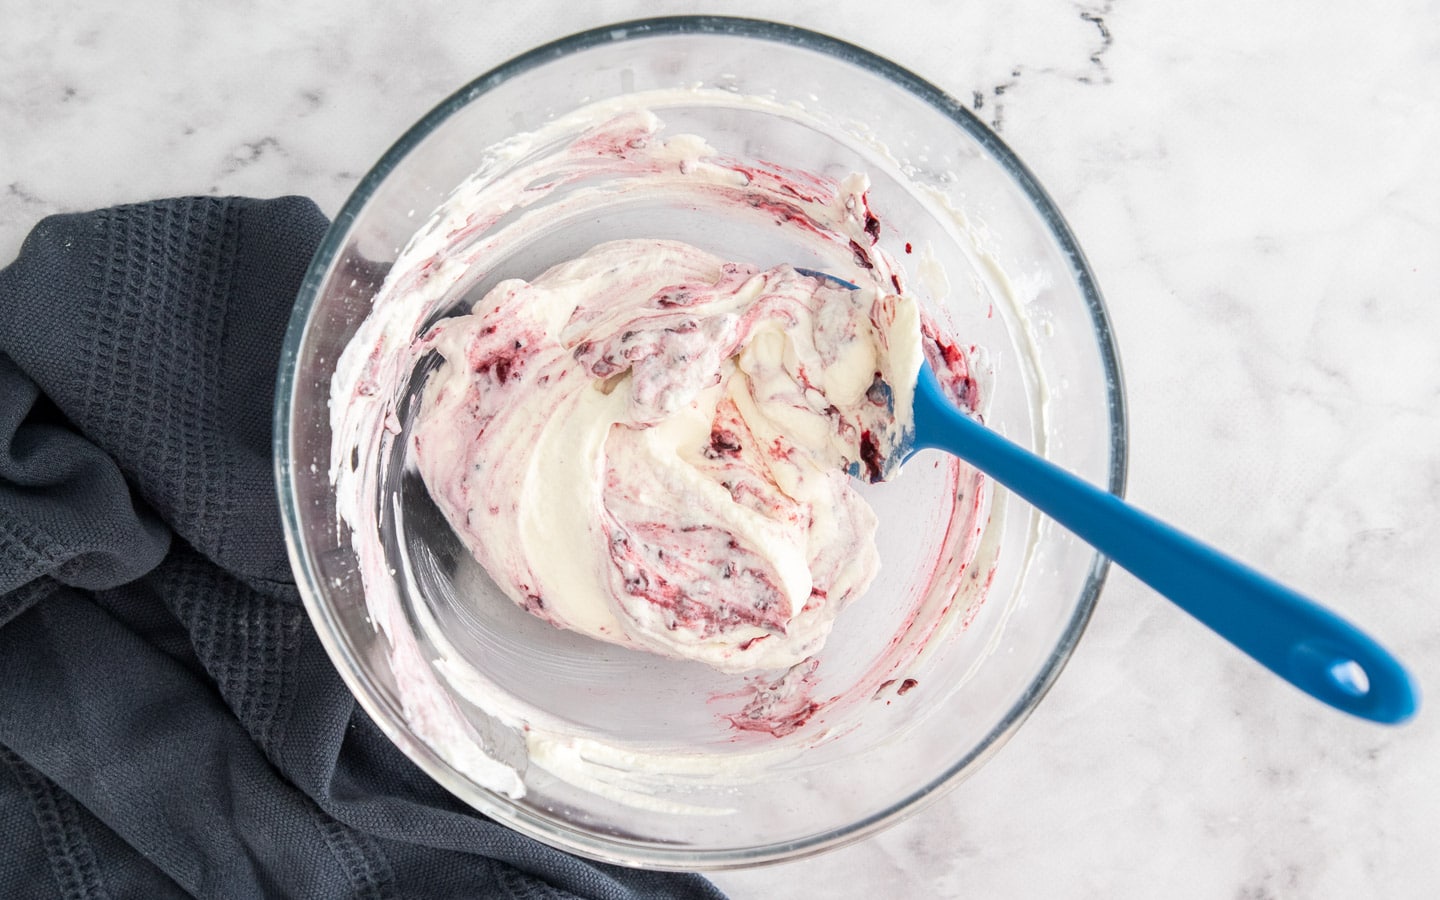 Swirling the compote through whipped cream.